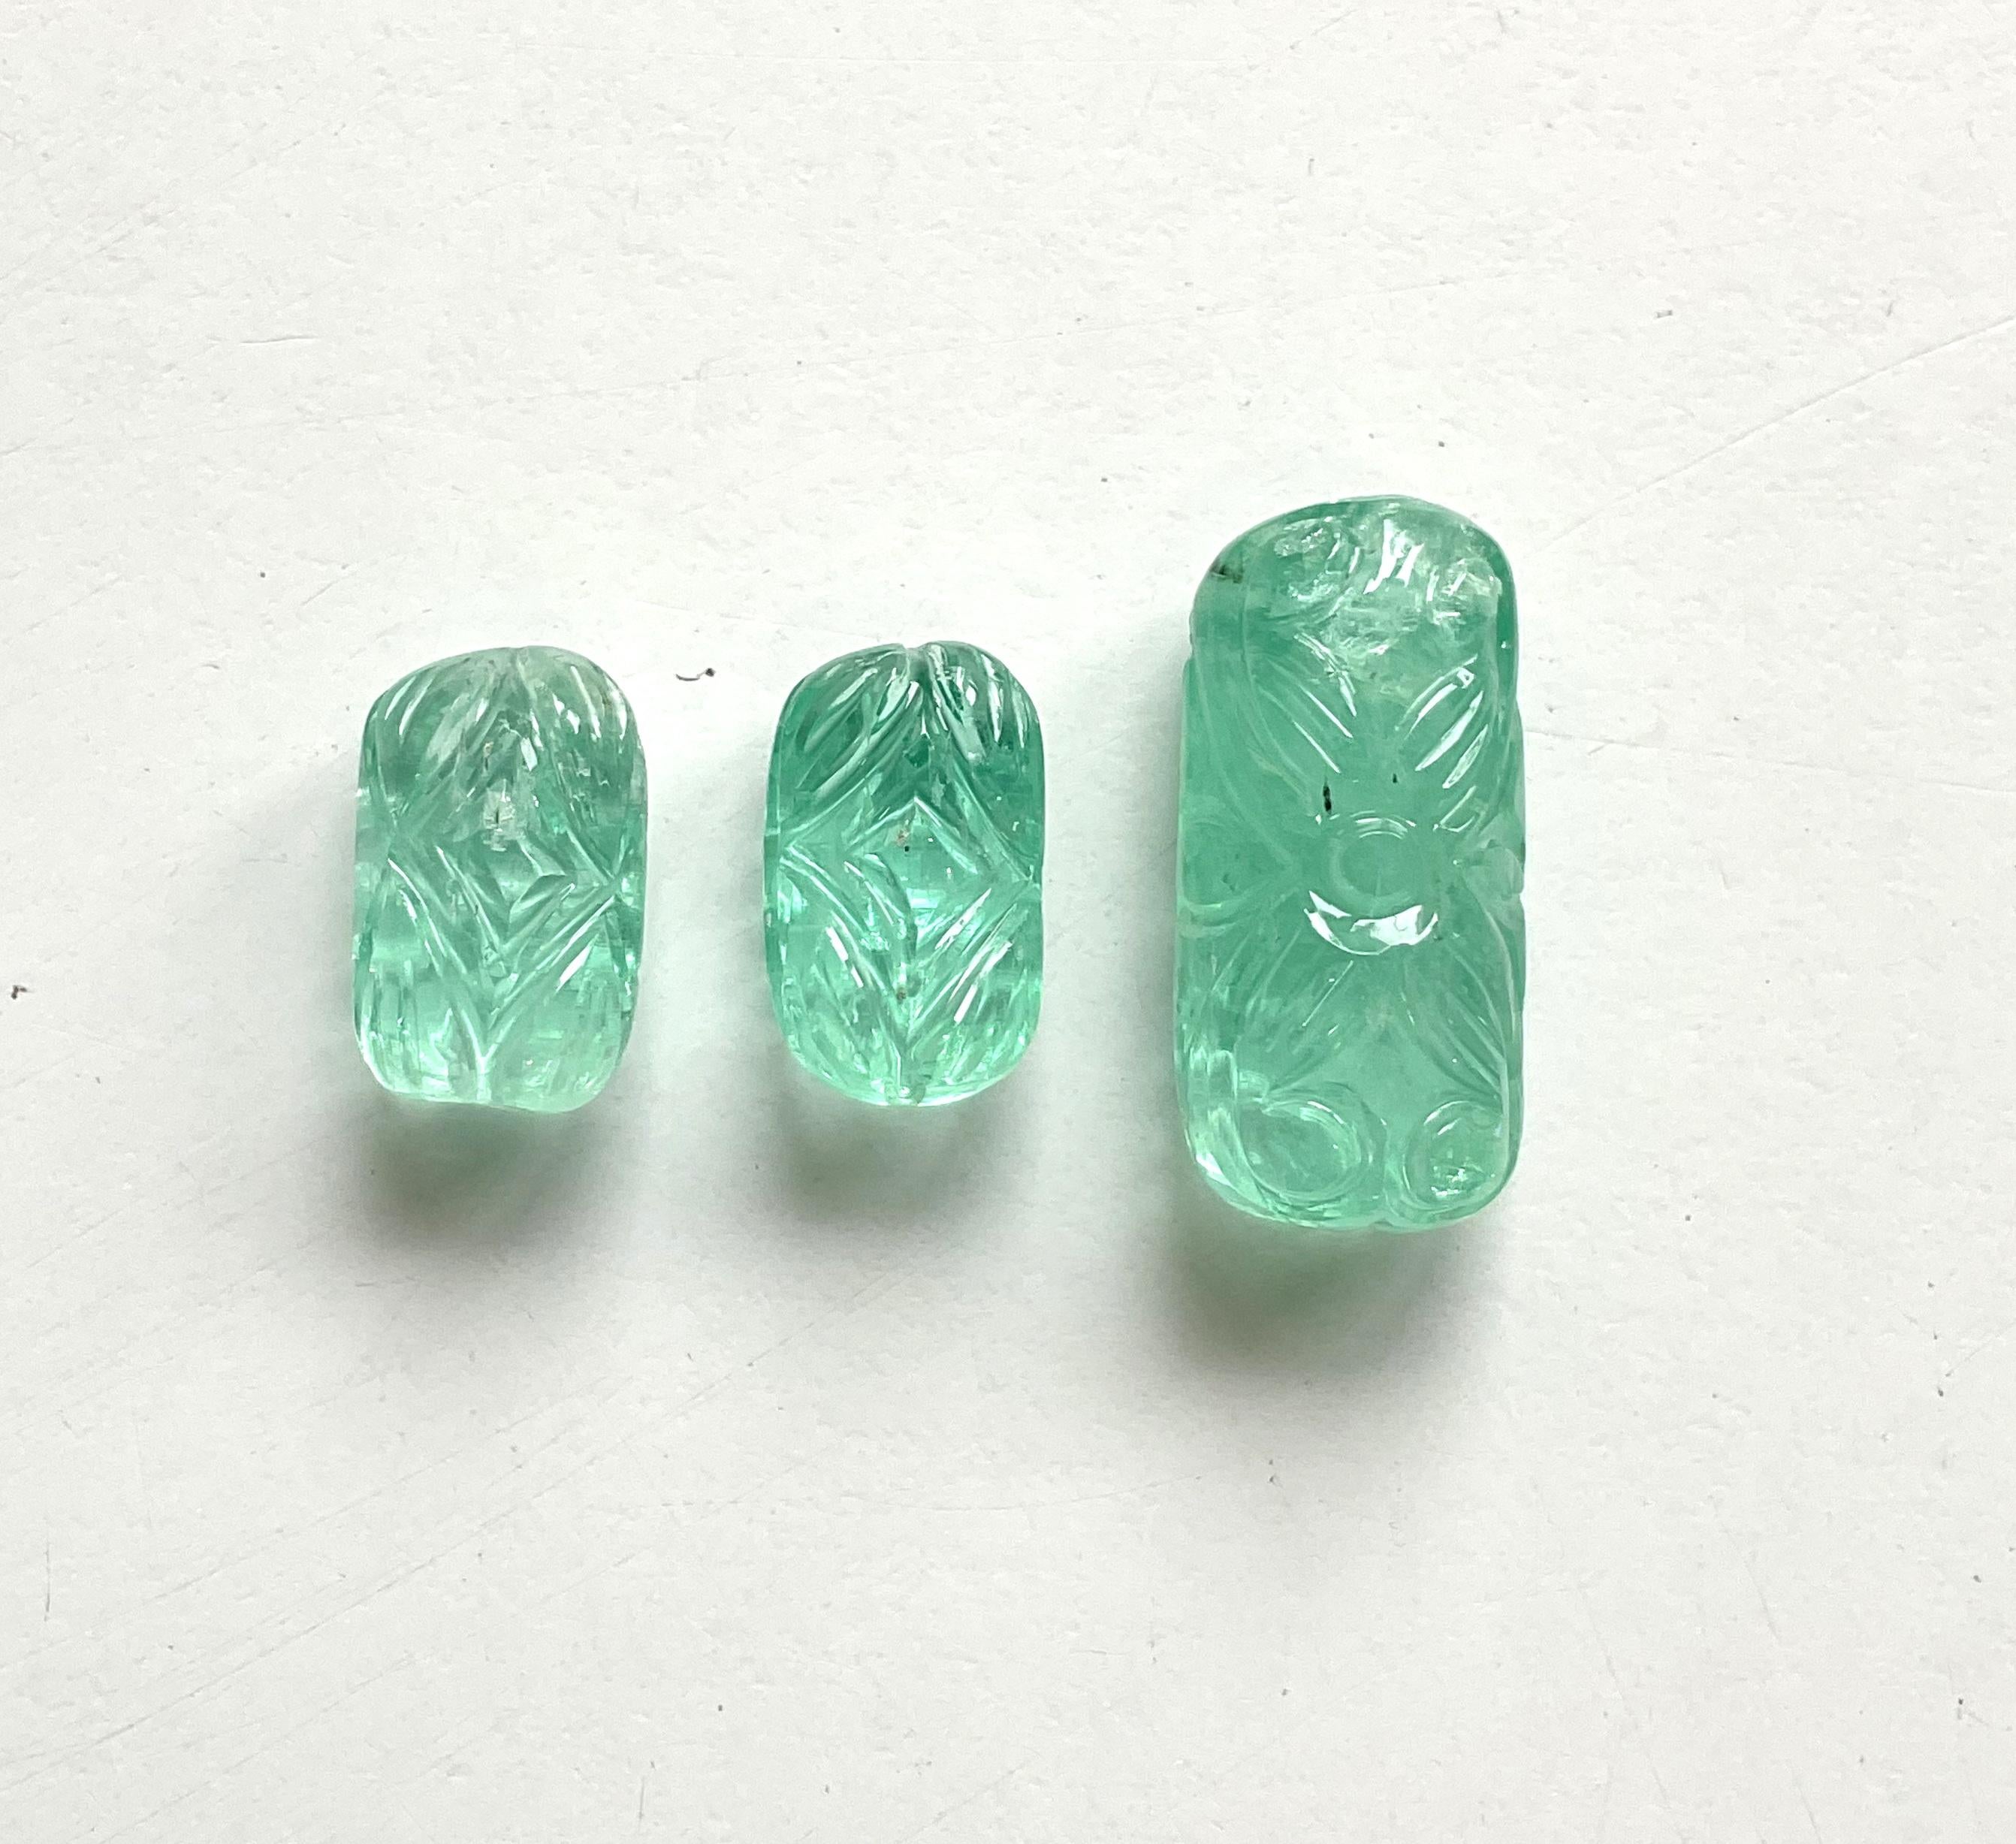 39.93 Carats Russian Emerald Carved 3 Pieces Layout For Jewelry Natural Gemstone For Sale 1